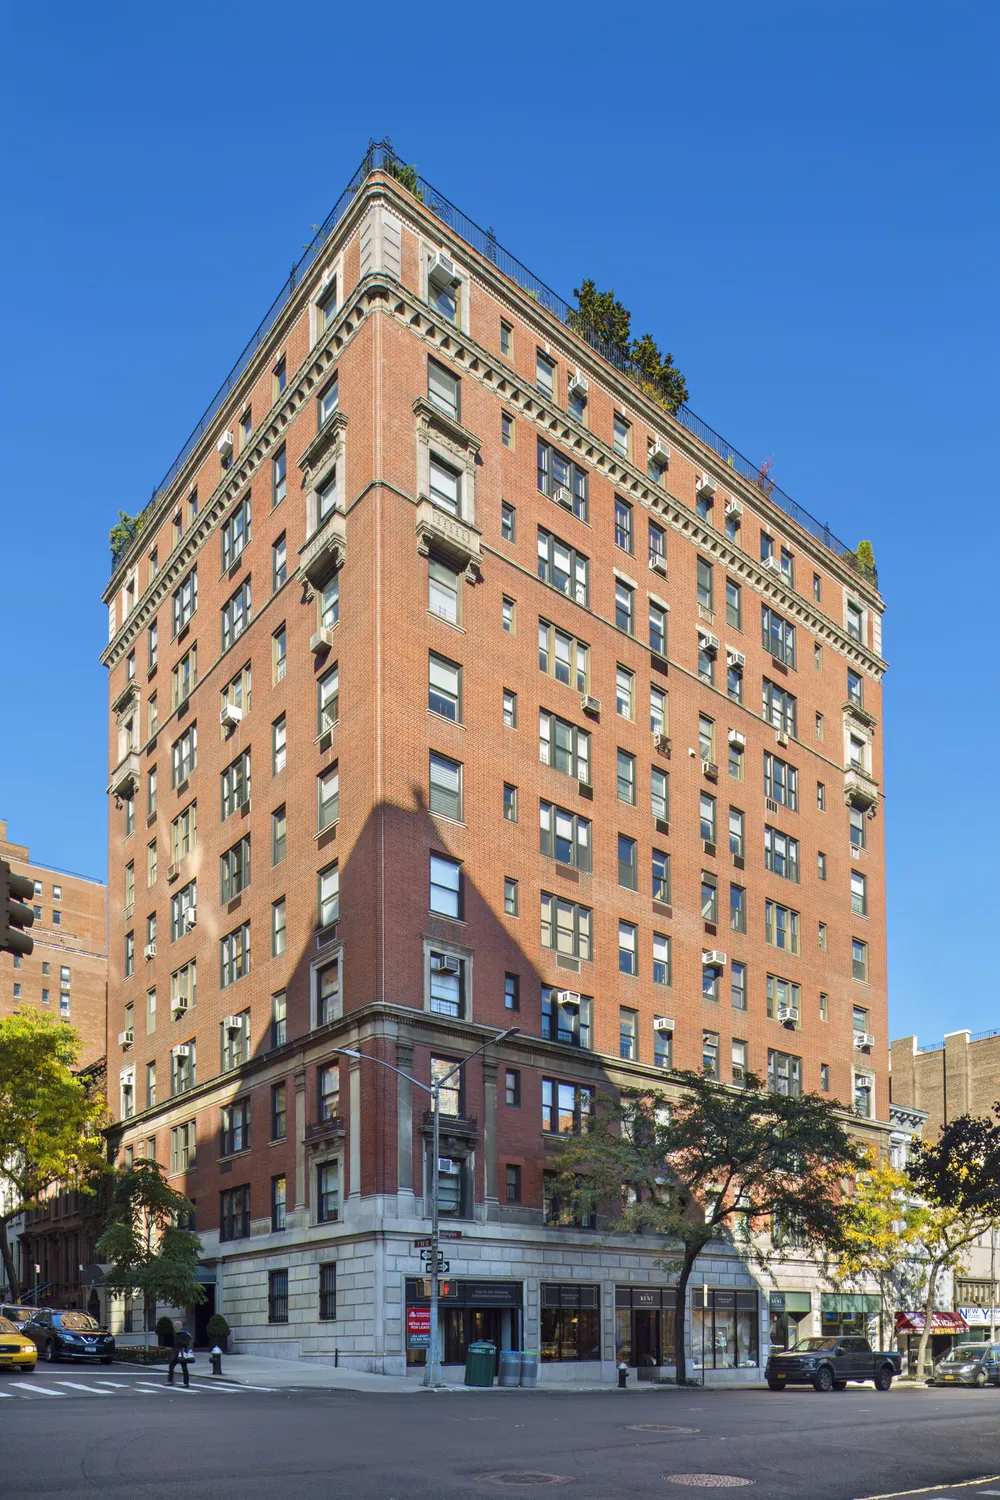 Ideal Carnegie Hill Location on Townhouse Block